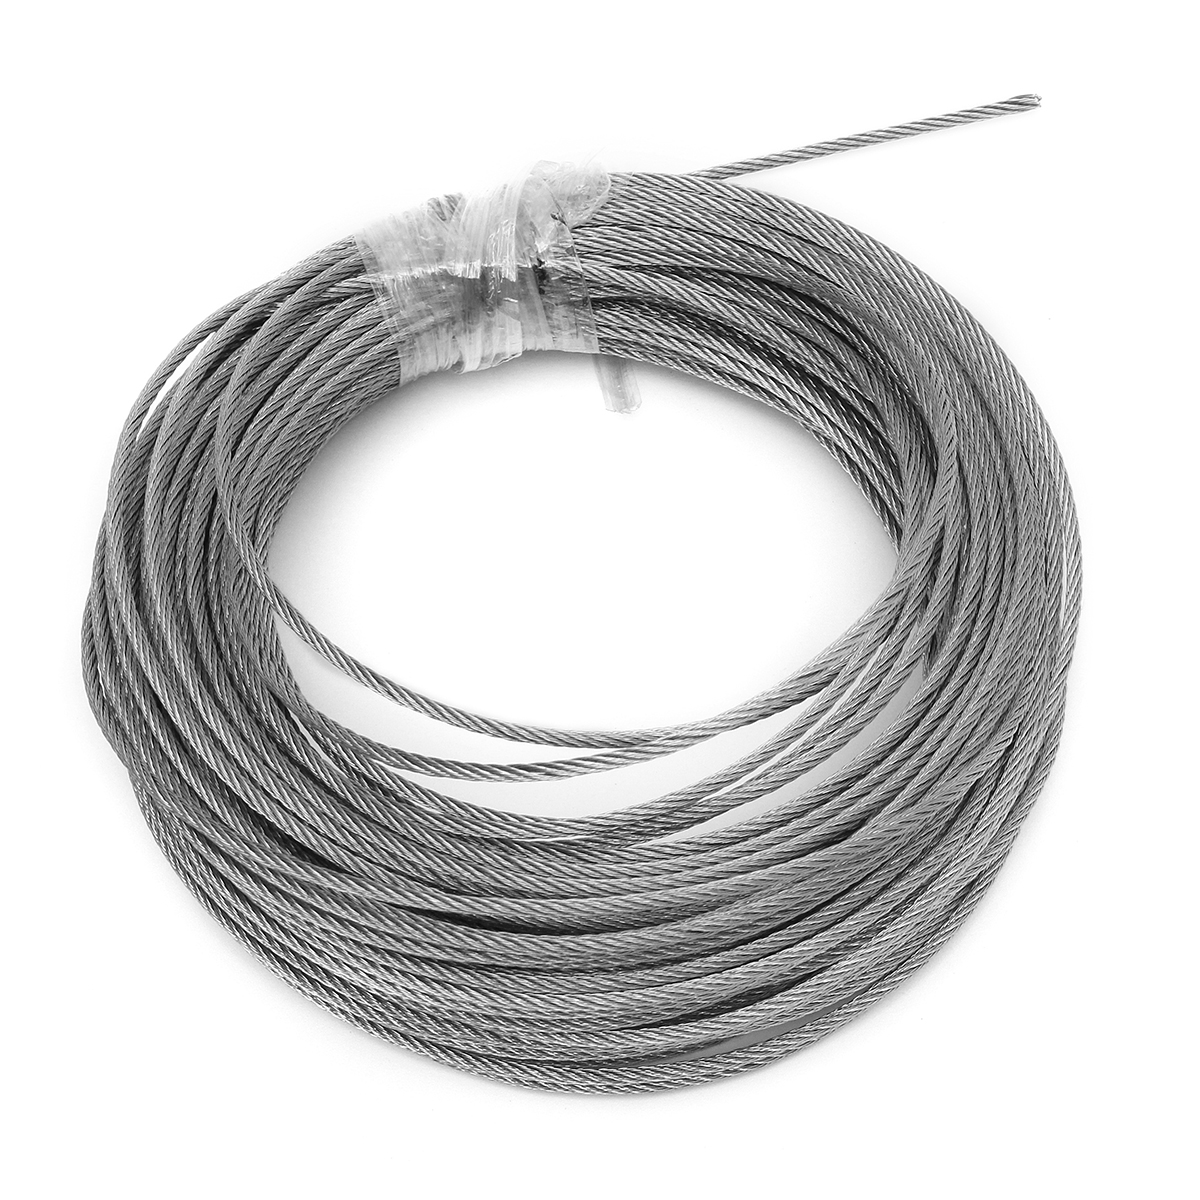 3mm-Stainless-Steel-Wire-Rope-Tensile-Diameter-Structure-Cable-1256987-1